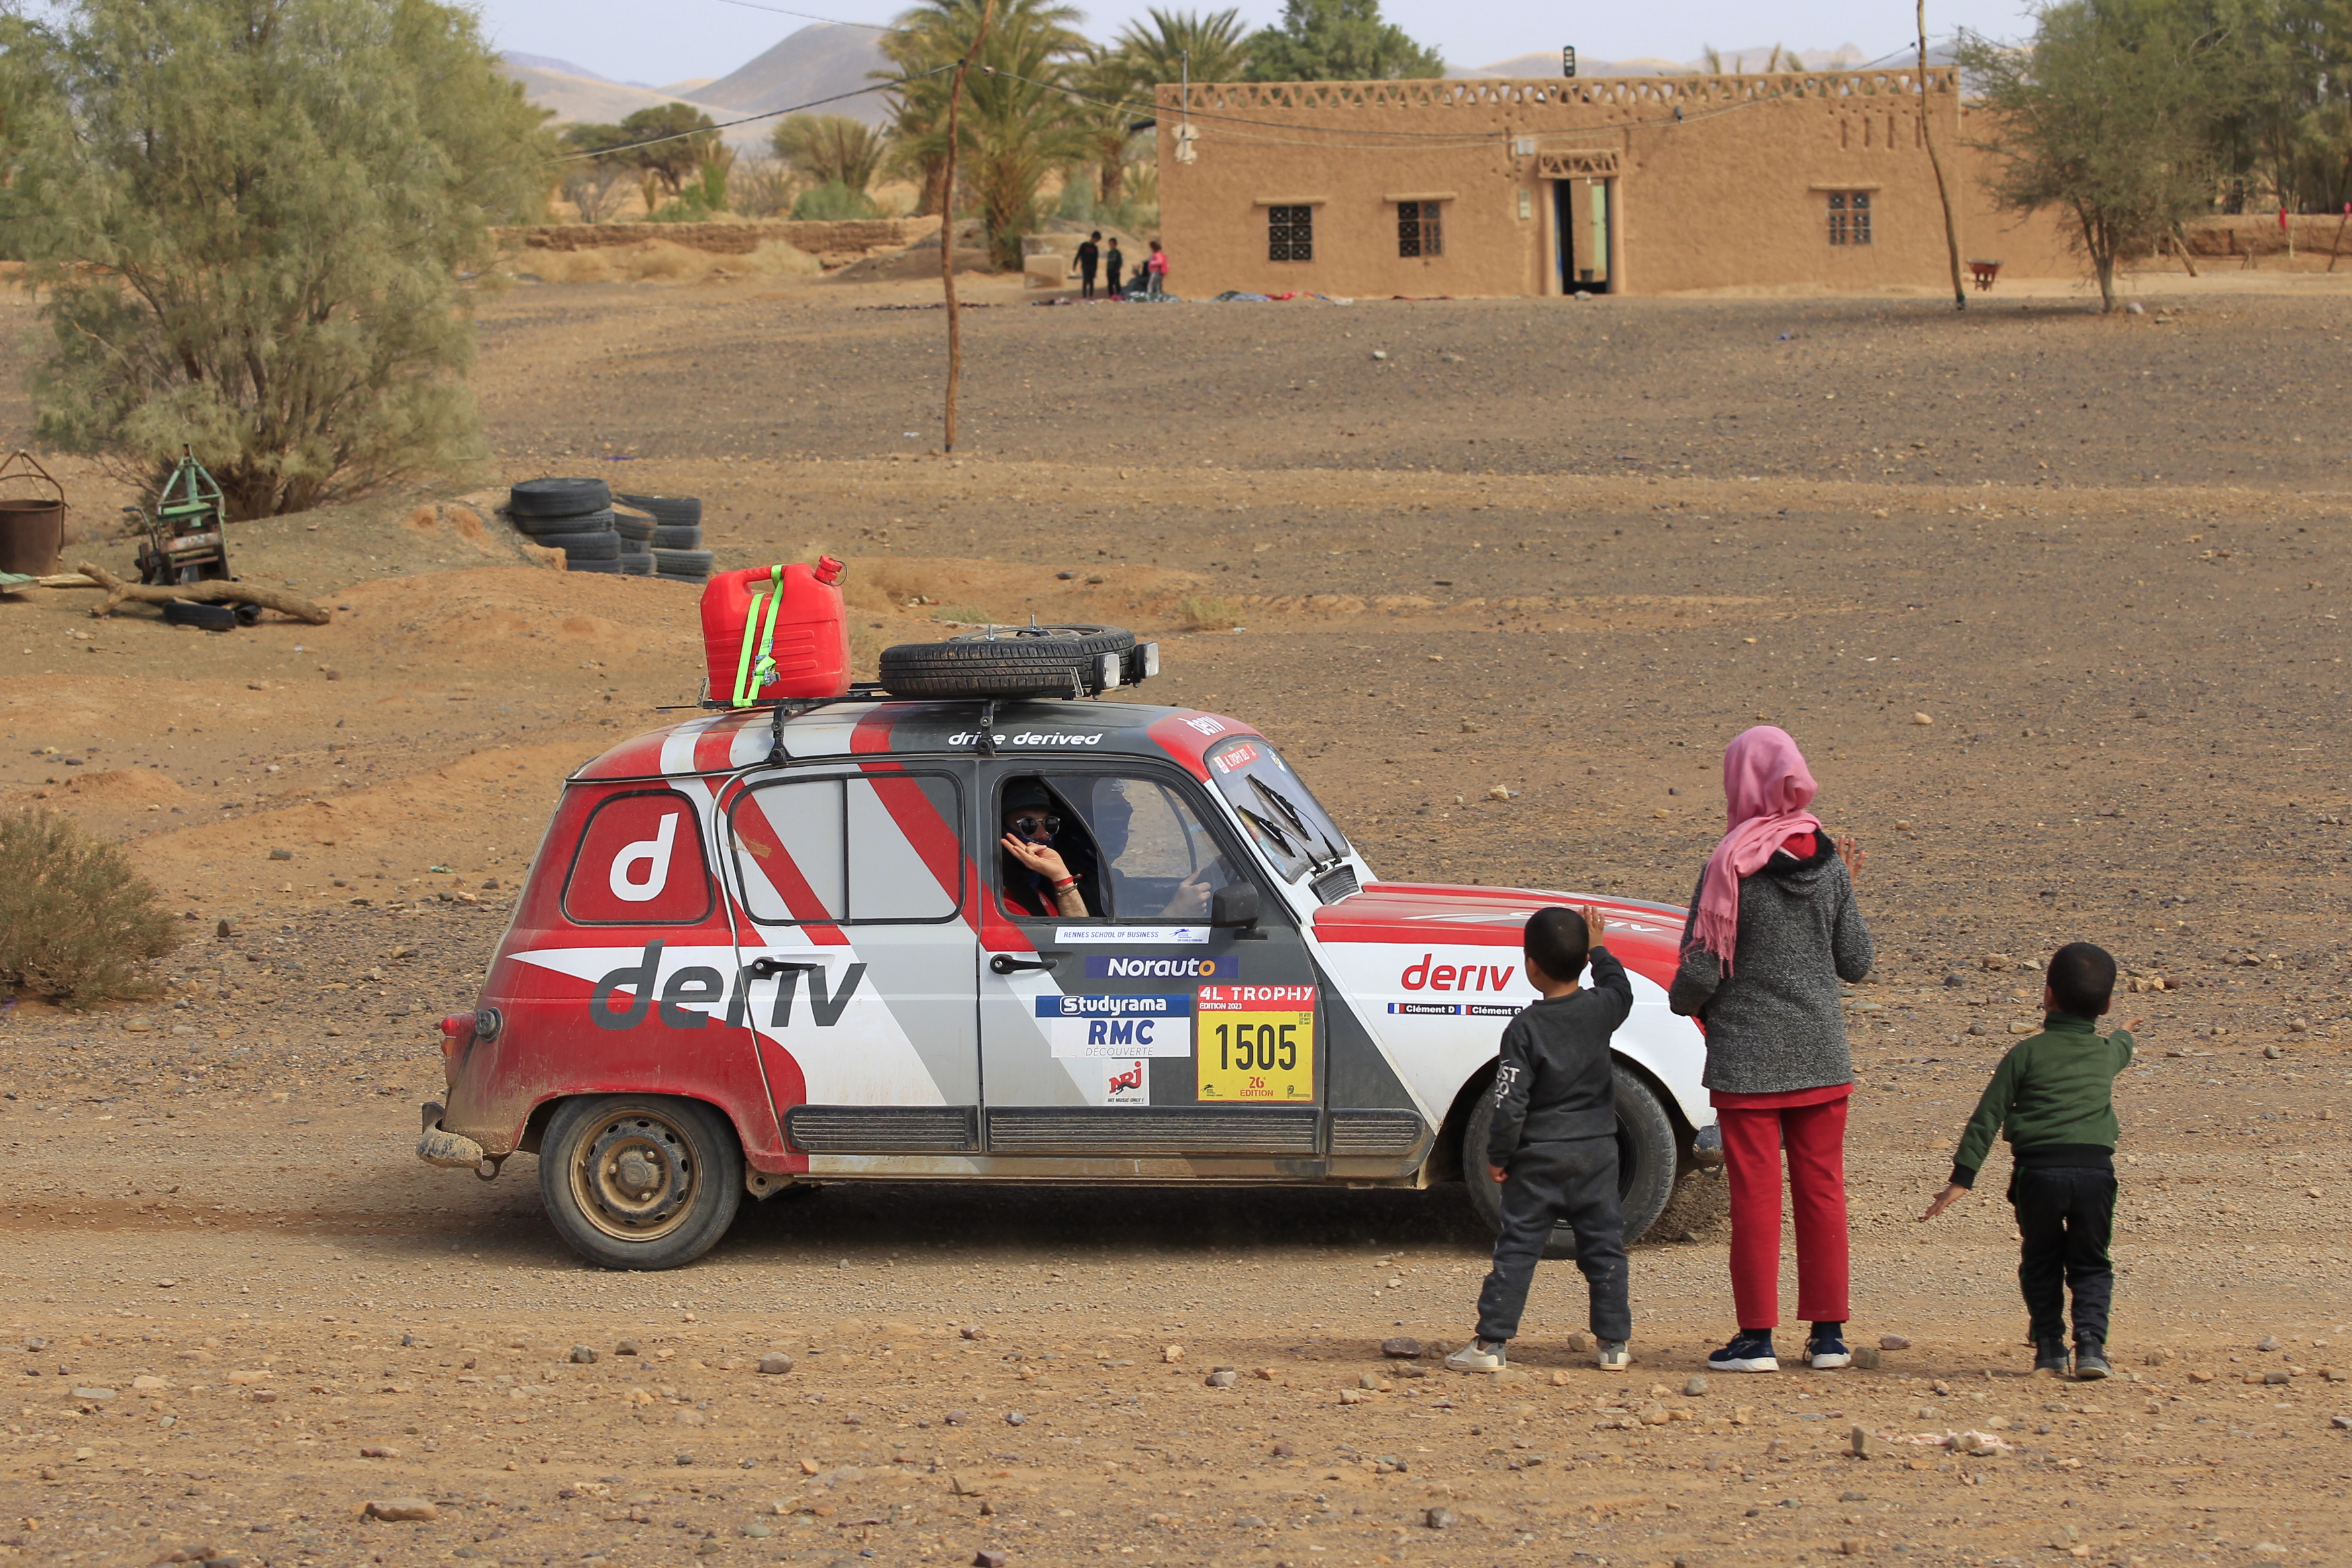 Deriv-sponsored team distributed humanitarian aid to children in need in Morocco.